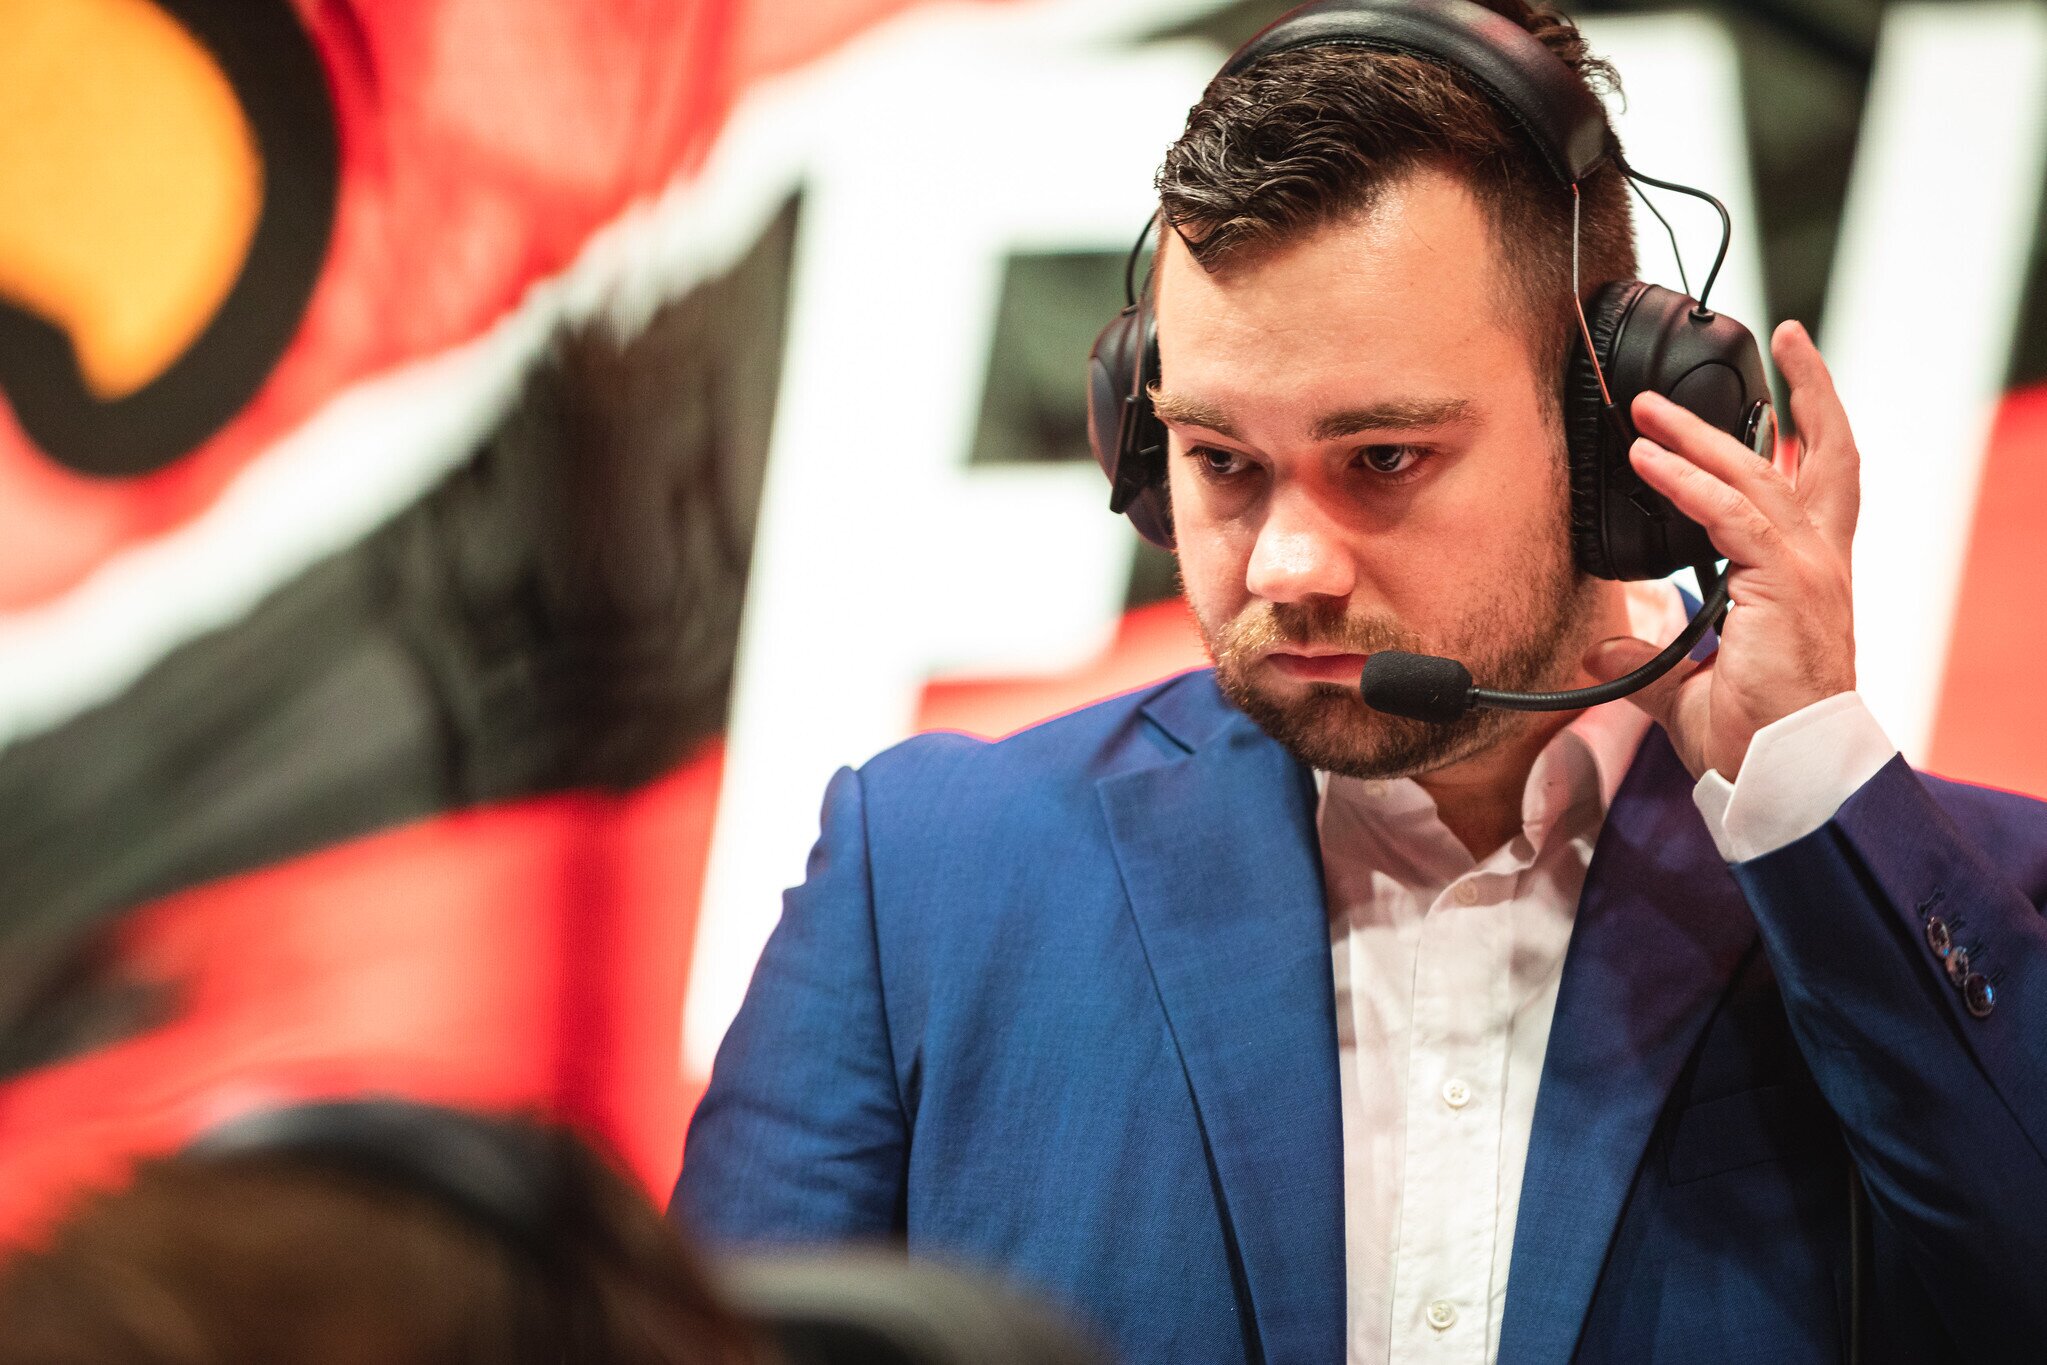 Youngbuck joined Fnatic’s support staff helmed by head coach Dylan Falco in 2018 (photo via Shannon Cottrell/Riot Games)